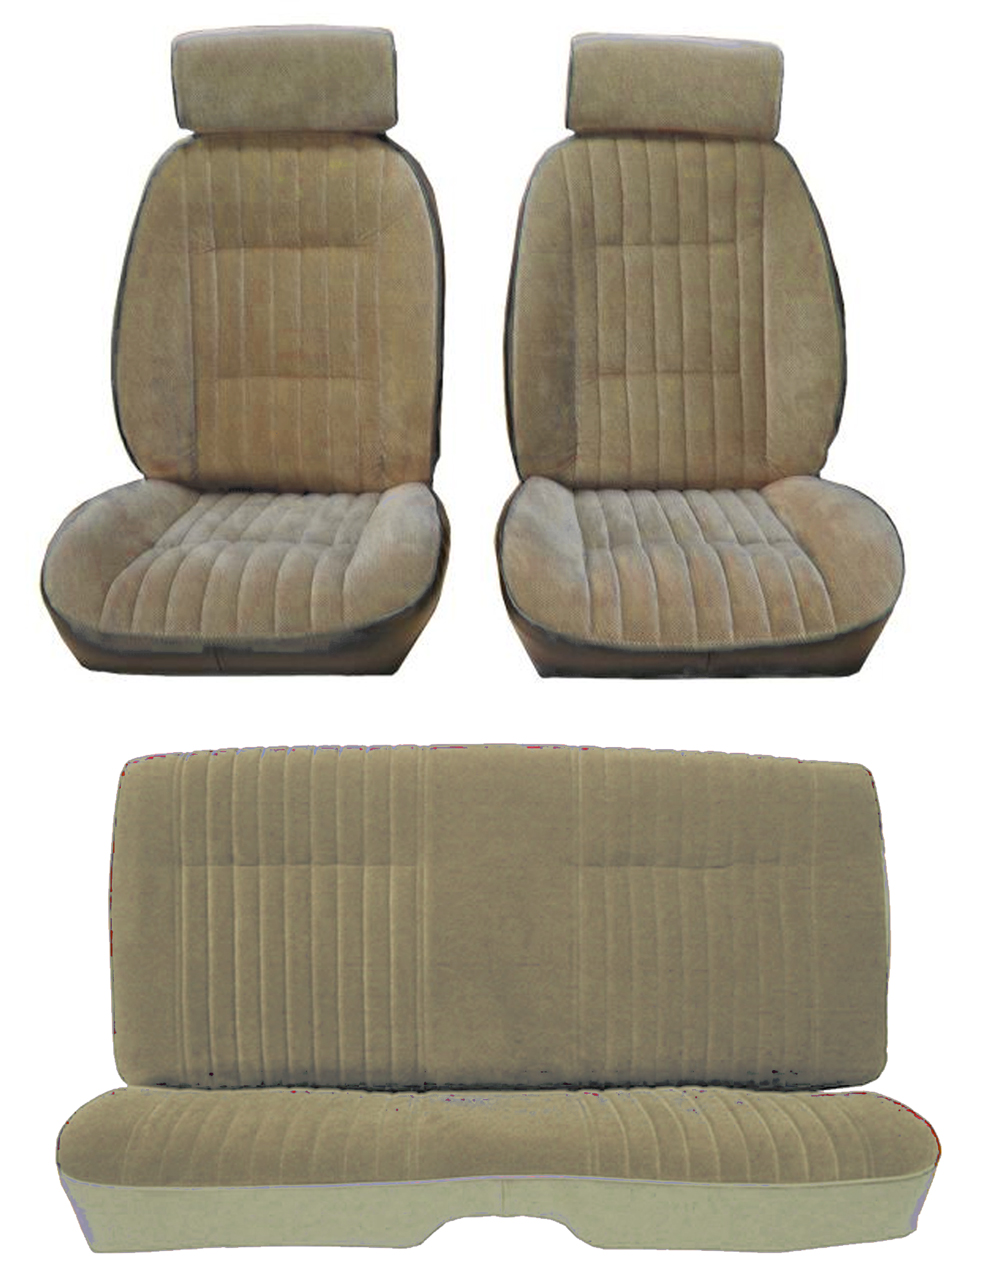 81-88 Monte Carlo SS Front Bucket and Rear Seat Covers Tan Vinyl